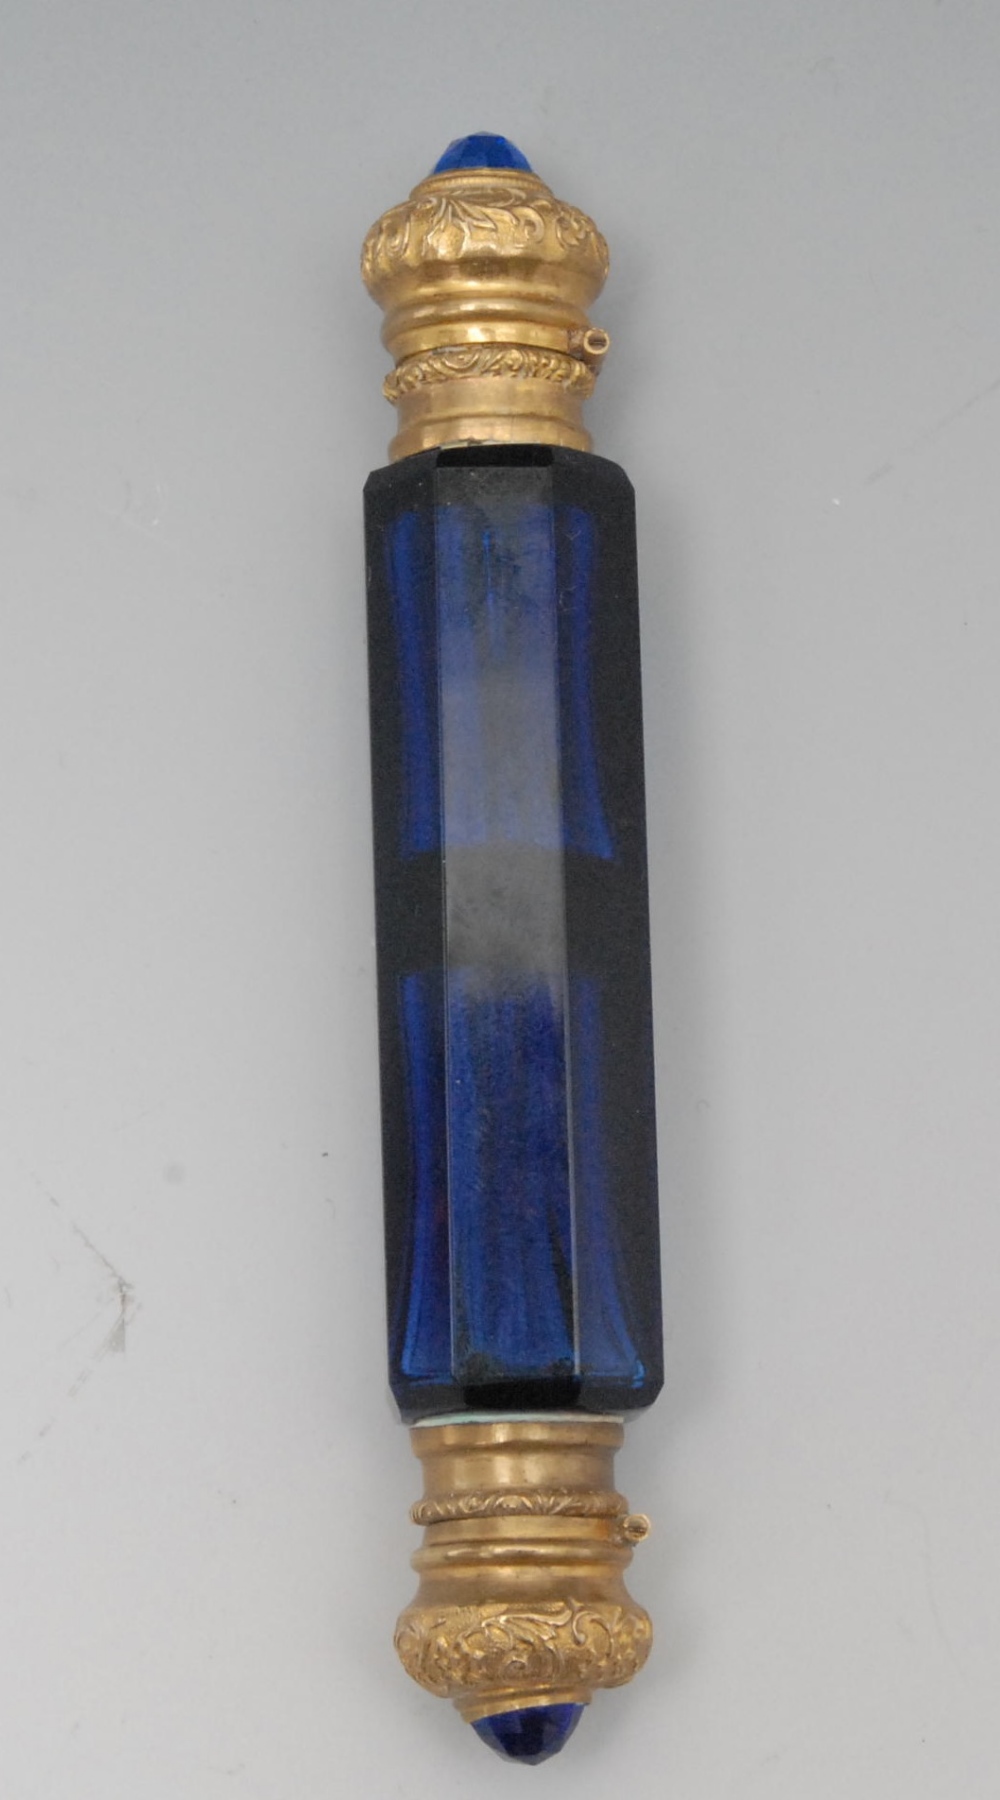 A 19th century gilt metal mounted blue glass double ended scent bottle, hinged covers cabachon set